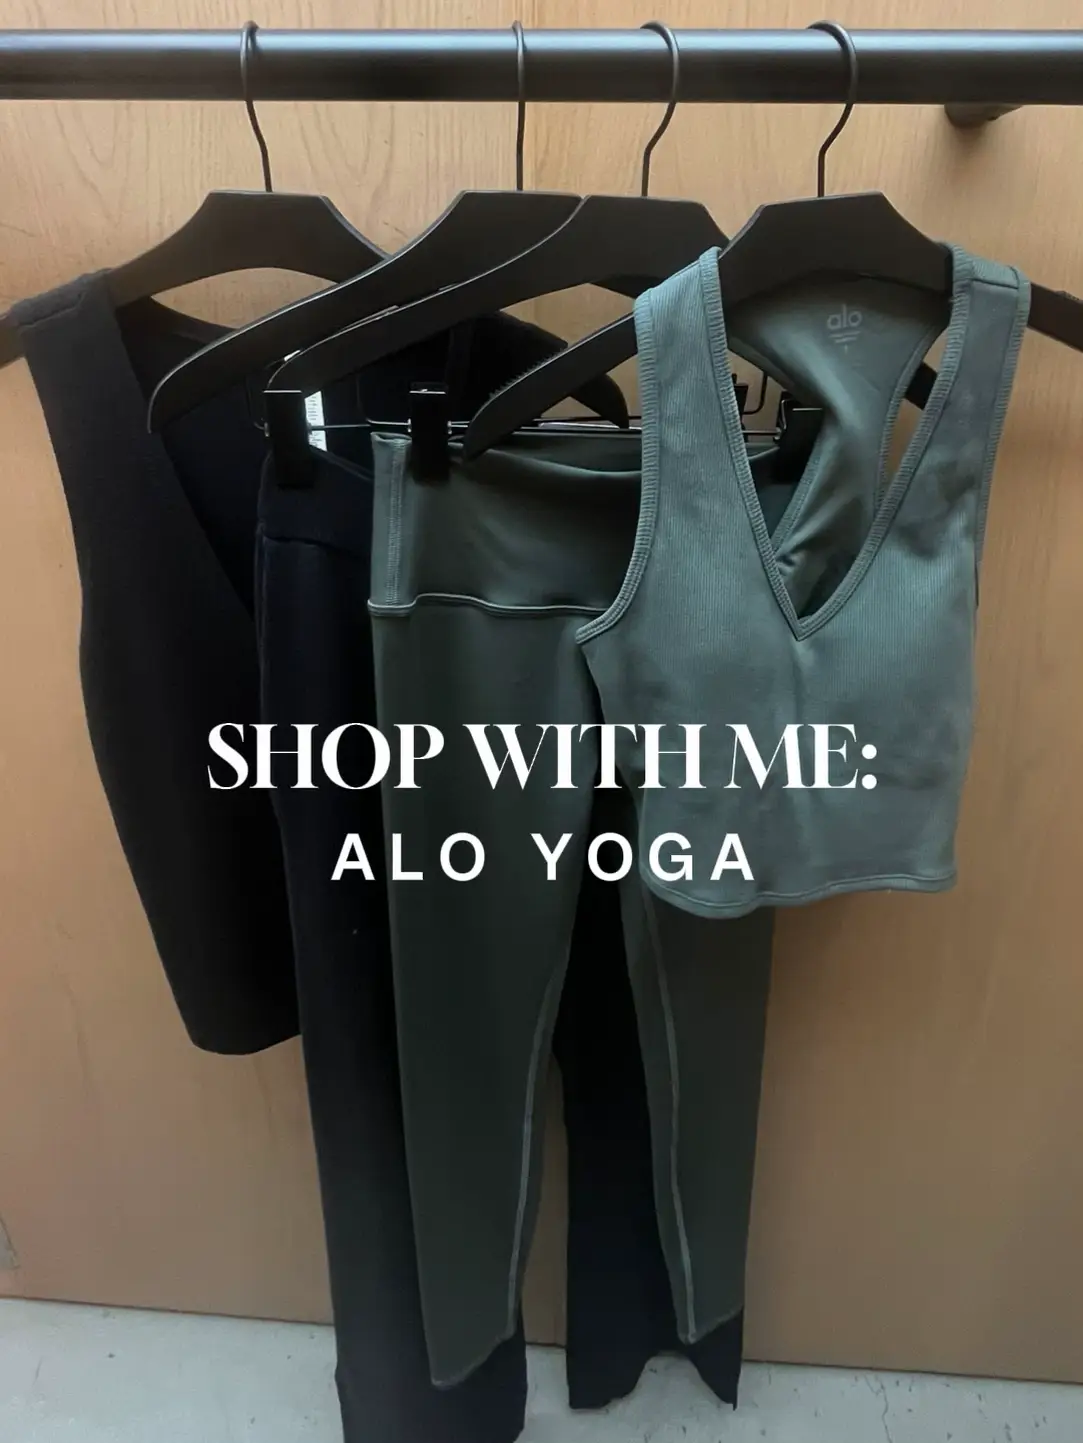 WORKOUT OOTD: Alo Yoga, Gallery posted by beccawise